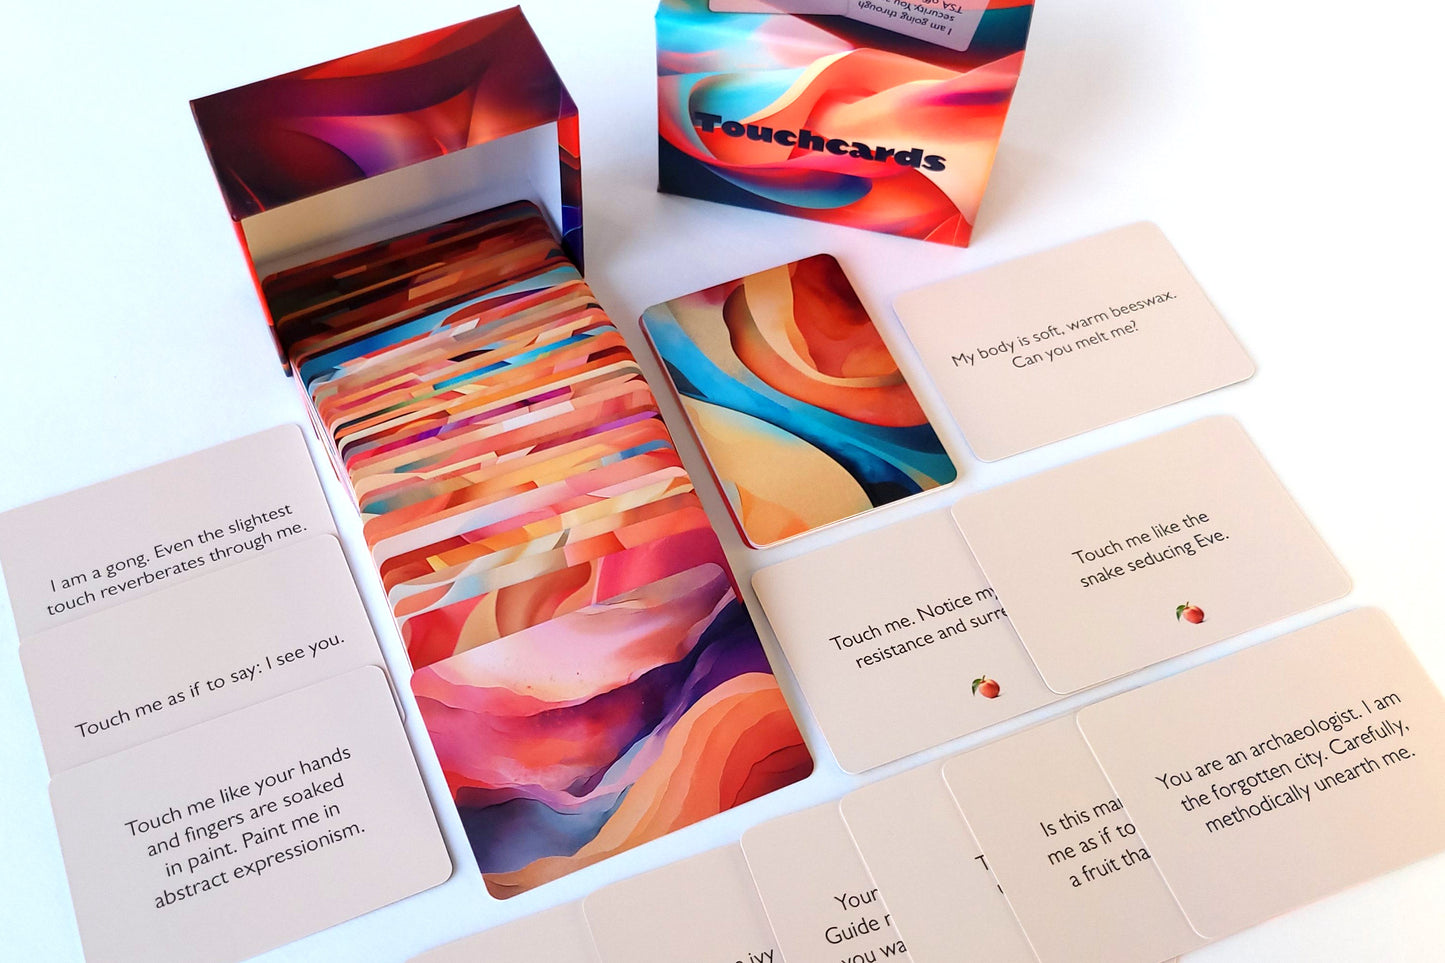 Touchcards